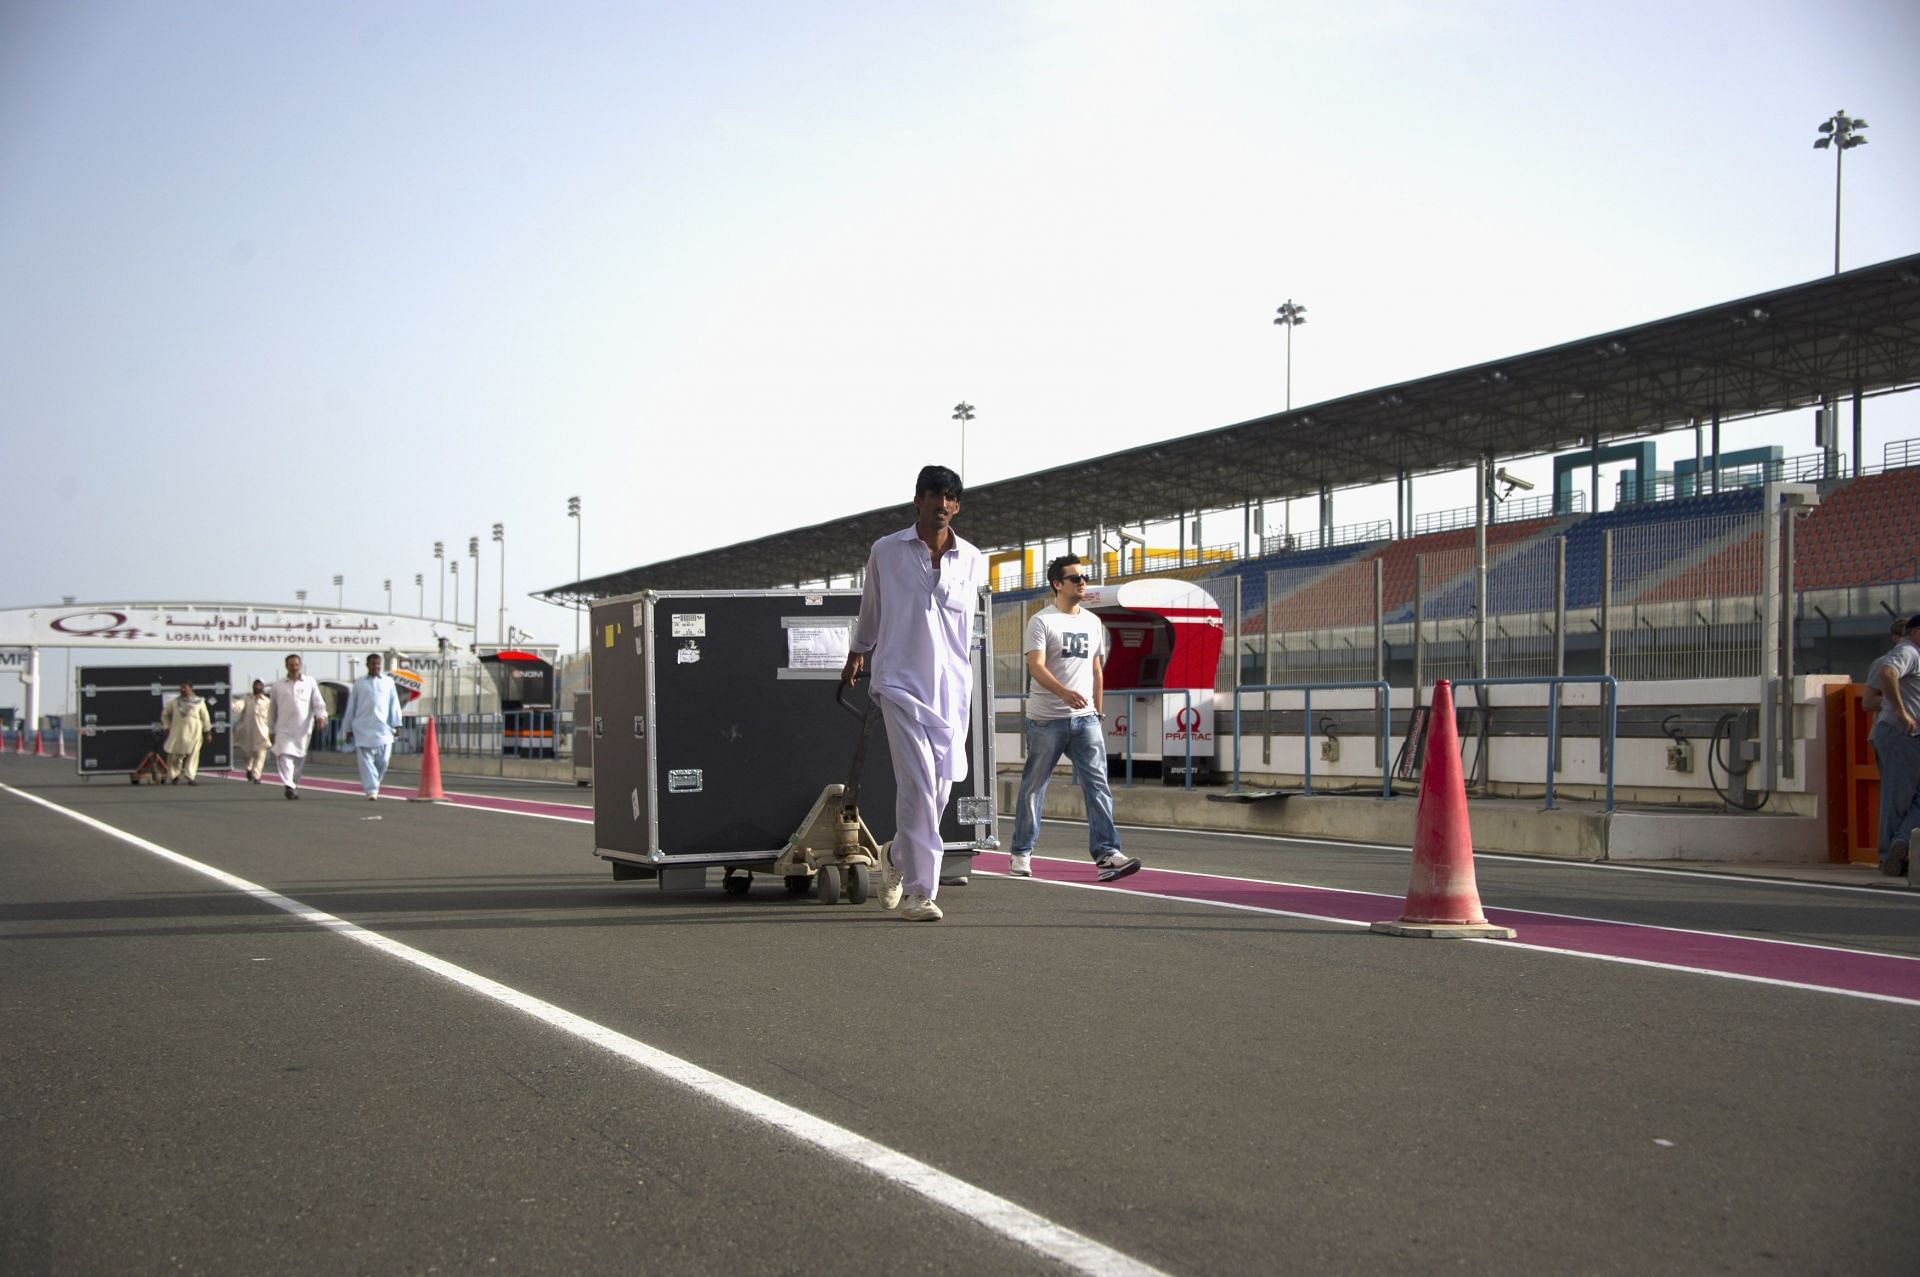 The Losail International Circuit will host its maiden F1 race. (Photo by Mirco Lazzari/Getty Images)